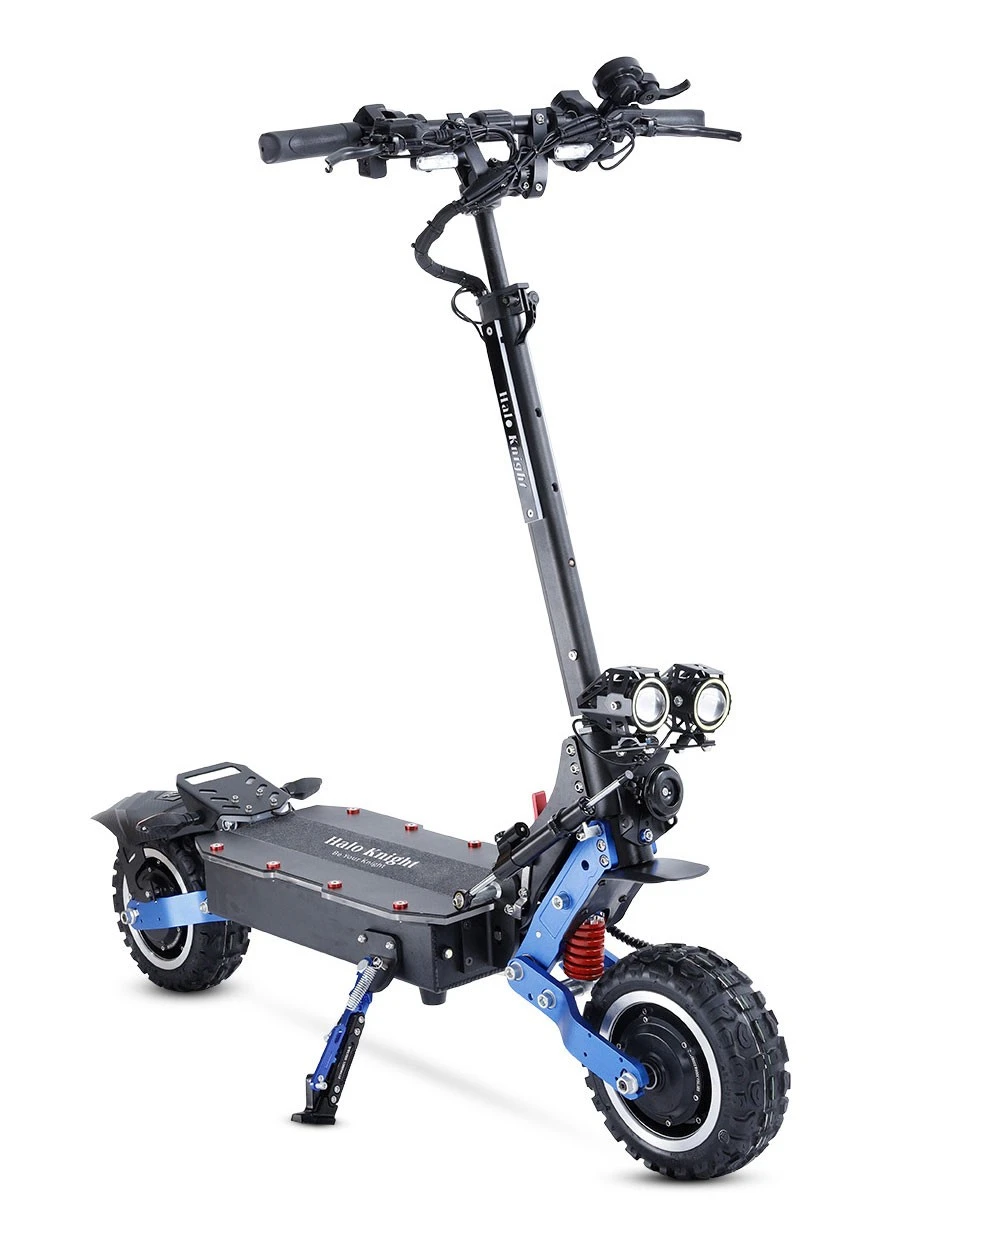 https://img.gkbcdn.com/d/202303/Halo-Knight-T108-Pro-Electric-Scooter-11---Off-road-Tire-519912-20._p1_.jpg